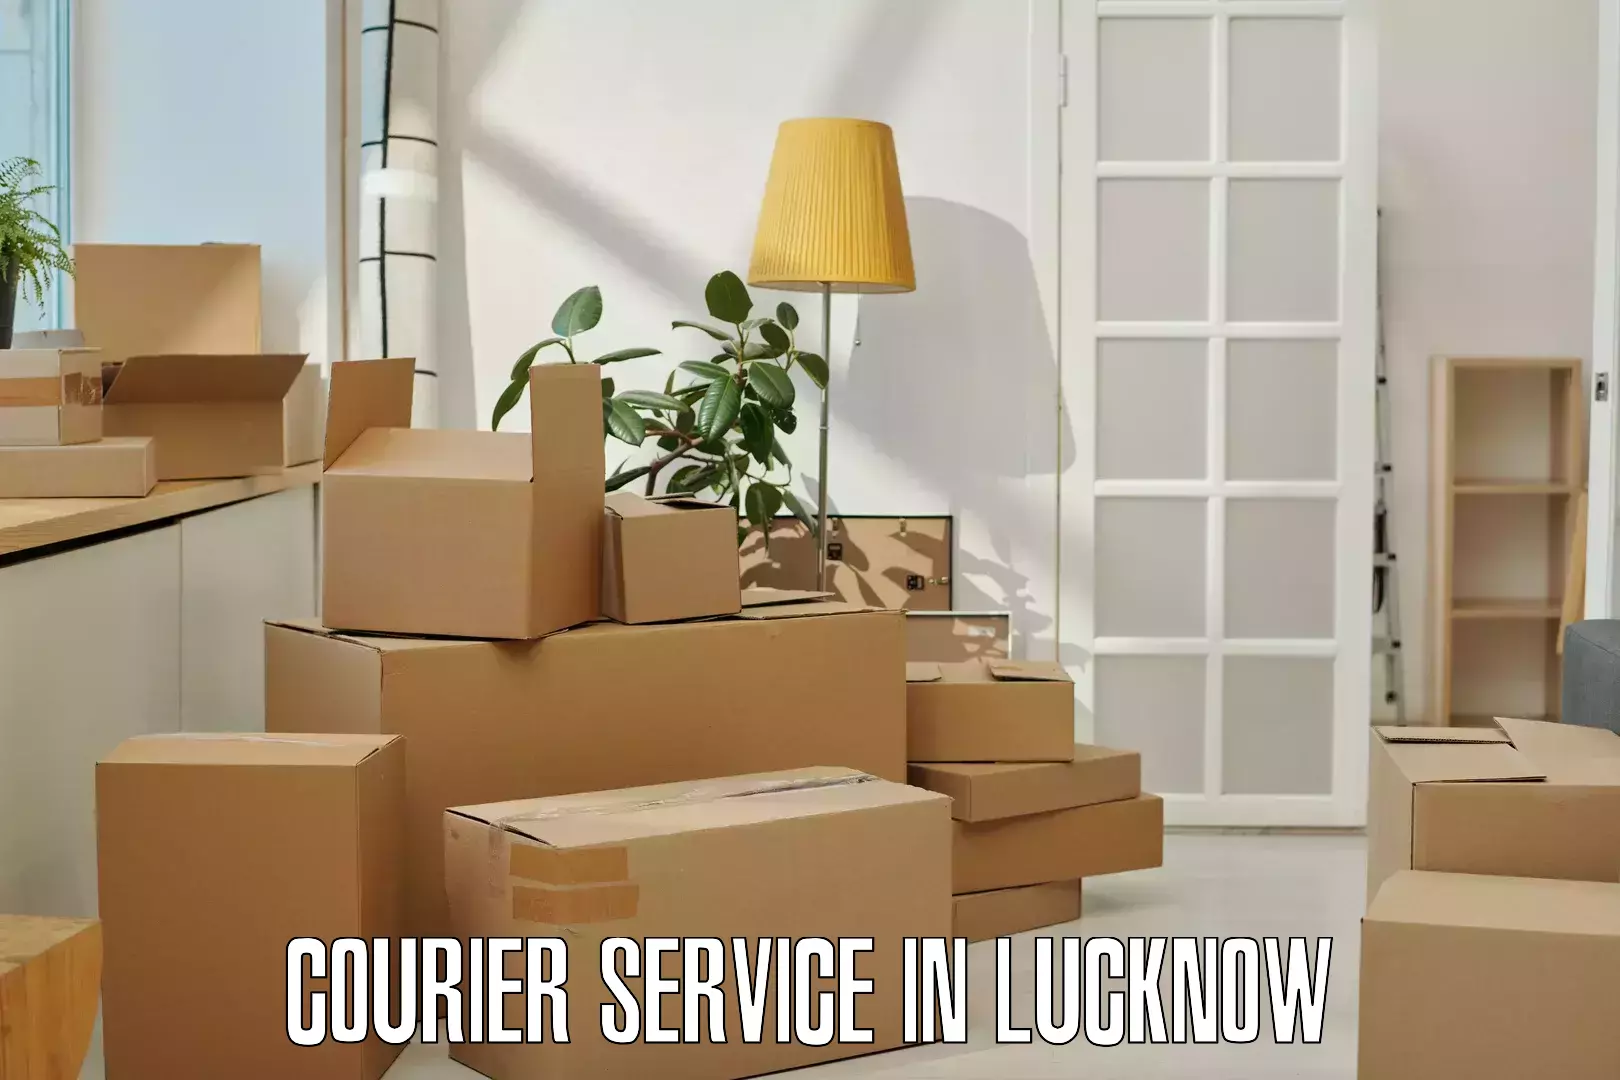 Flexible parcel services in Lucknow